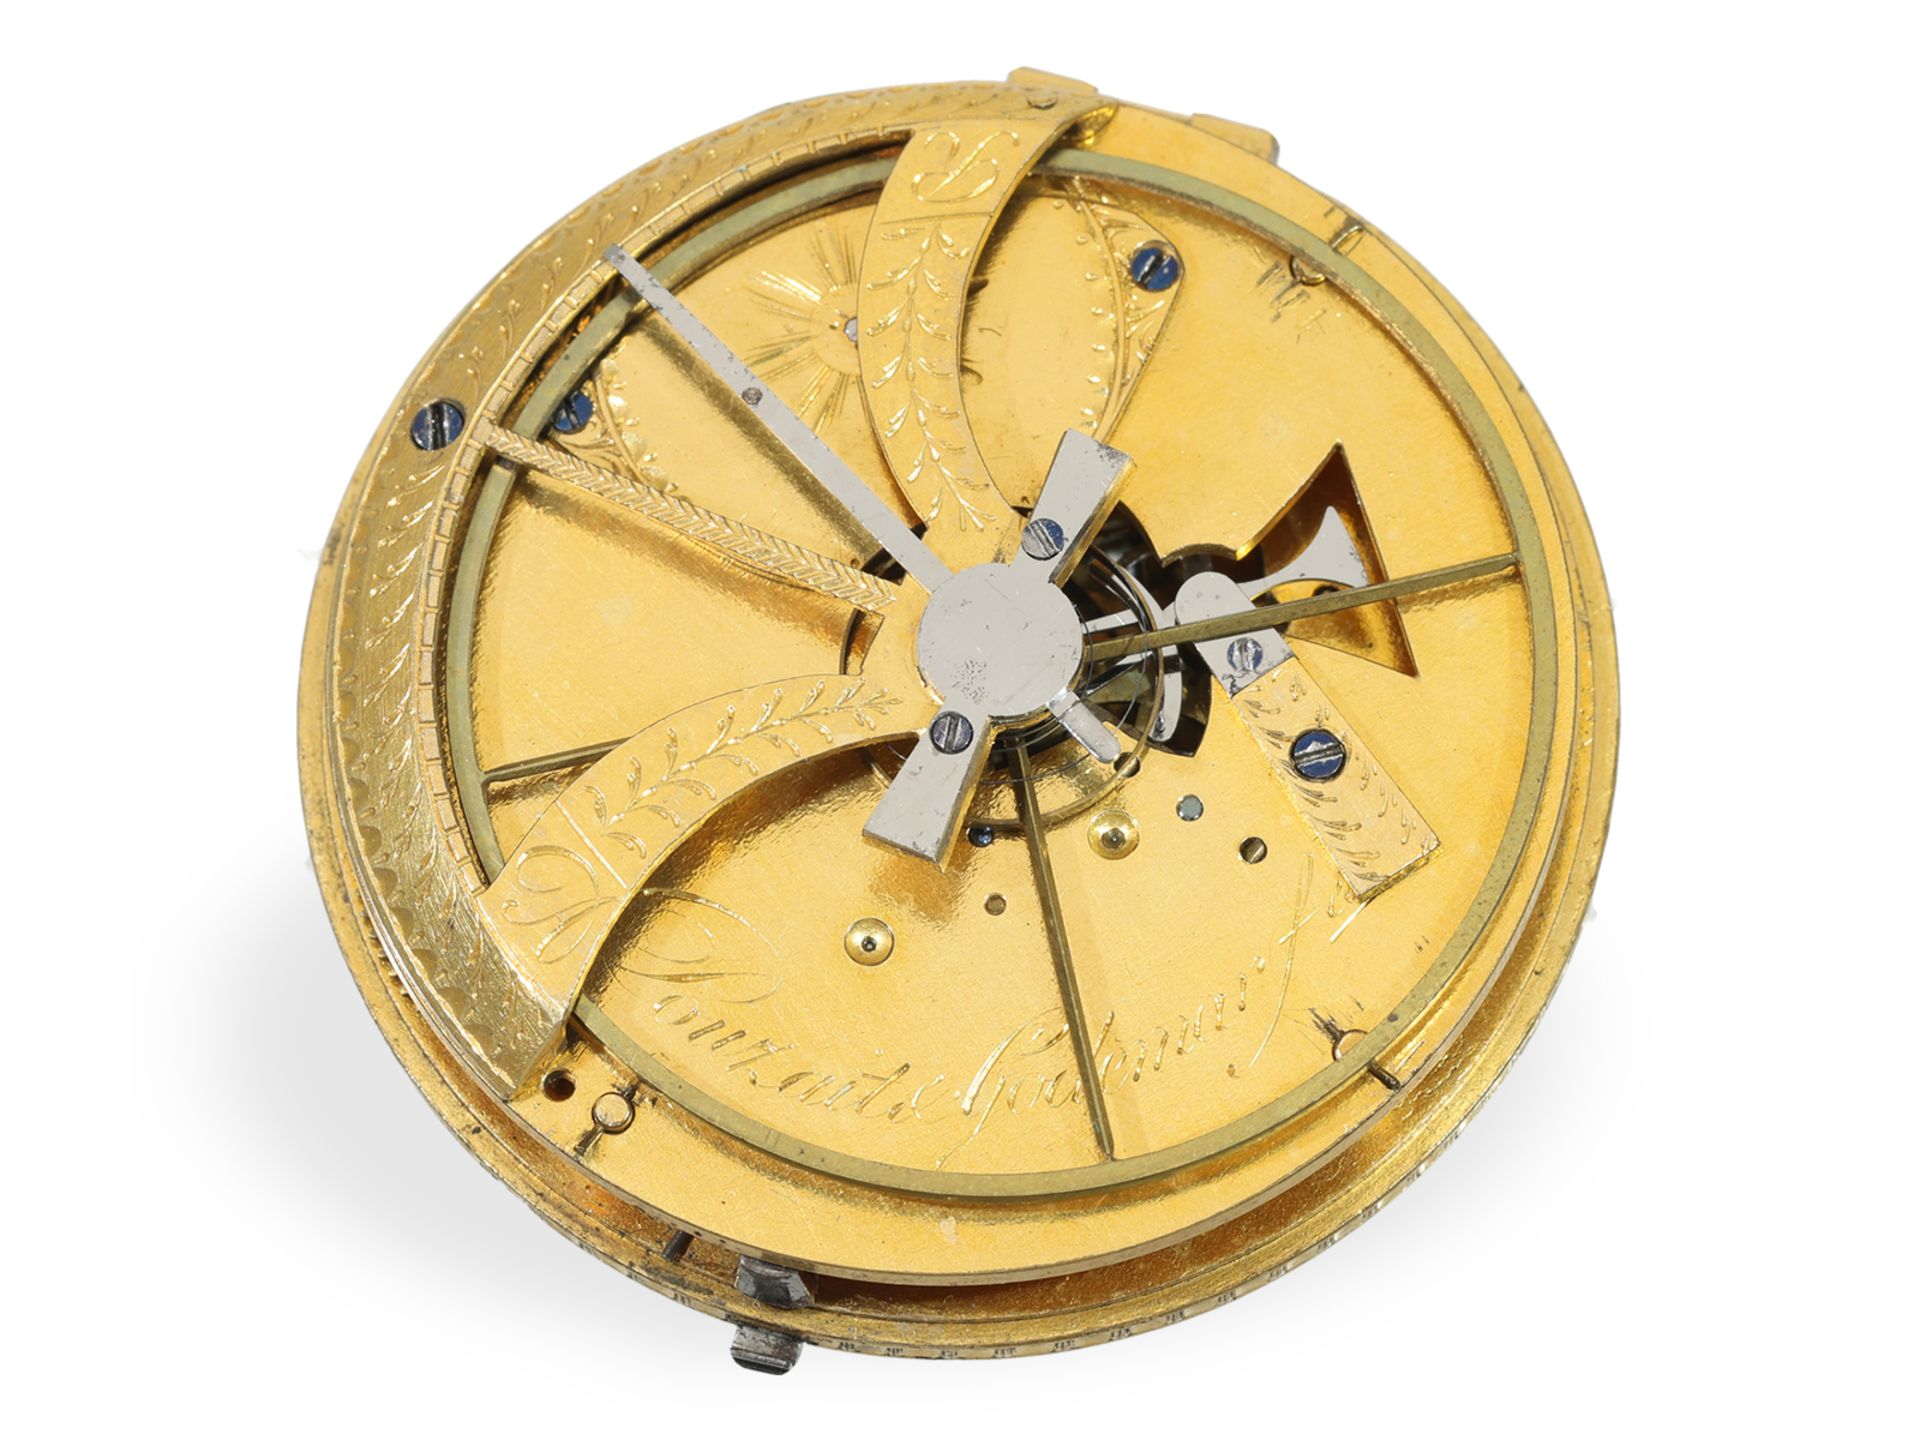 Pocket watch: absolute rarity, Pouzait with jumping seconds and calendar, signed Pouzait, ca. 1790 - Image 2 of 4